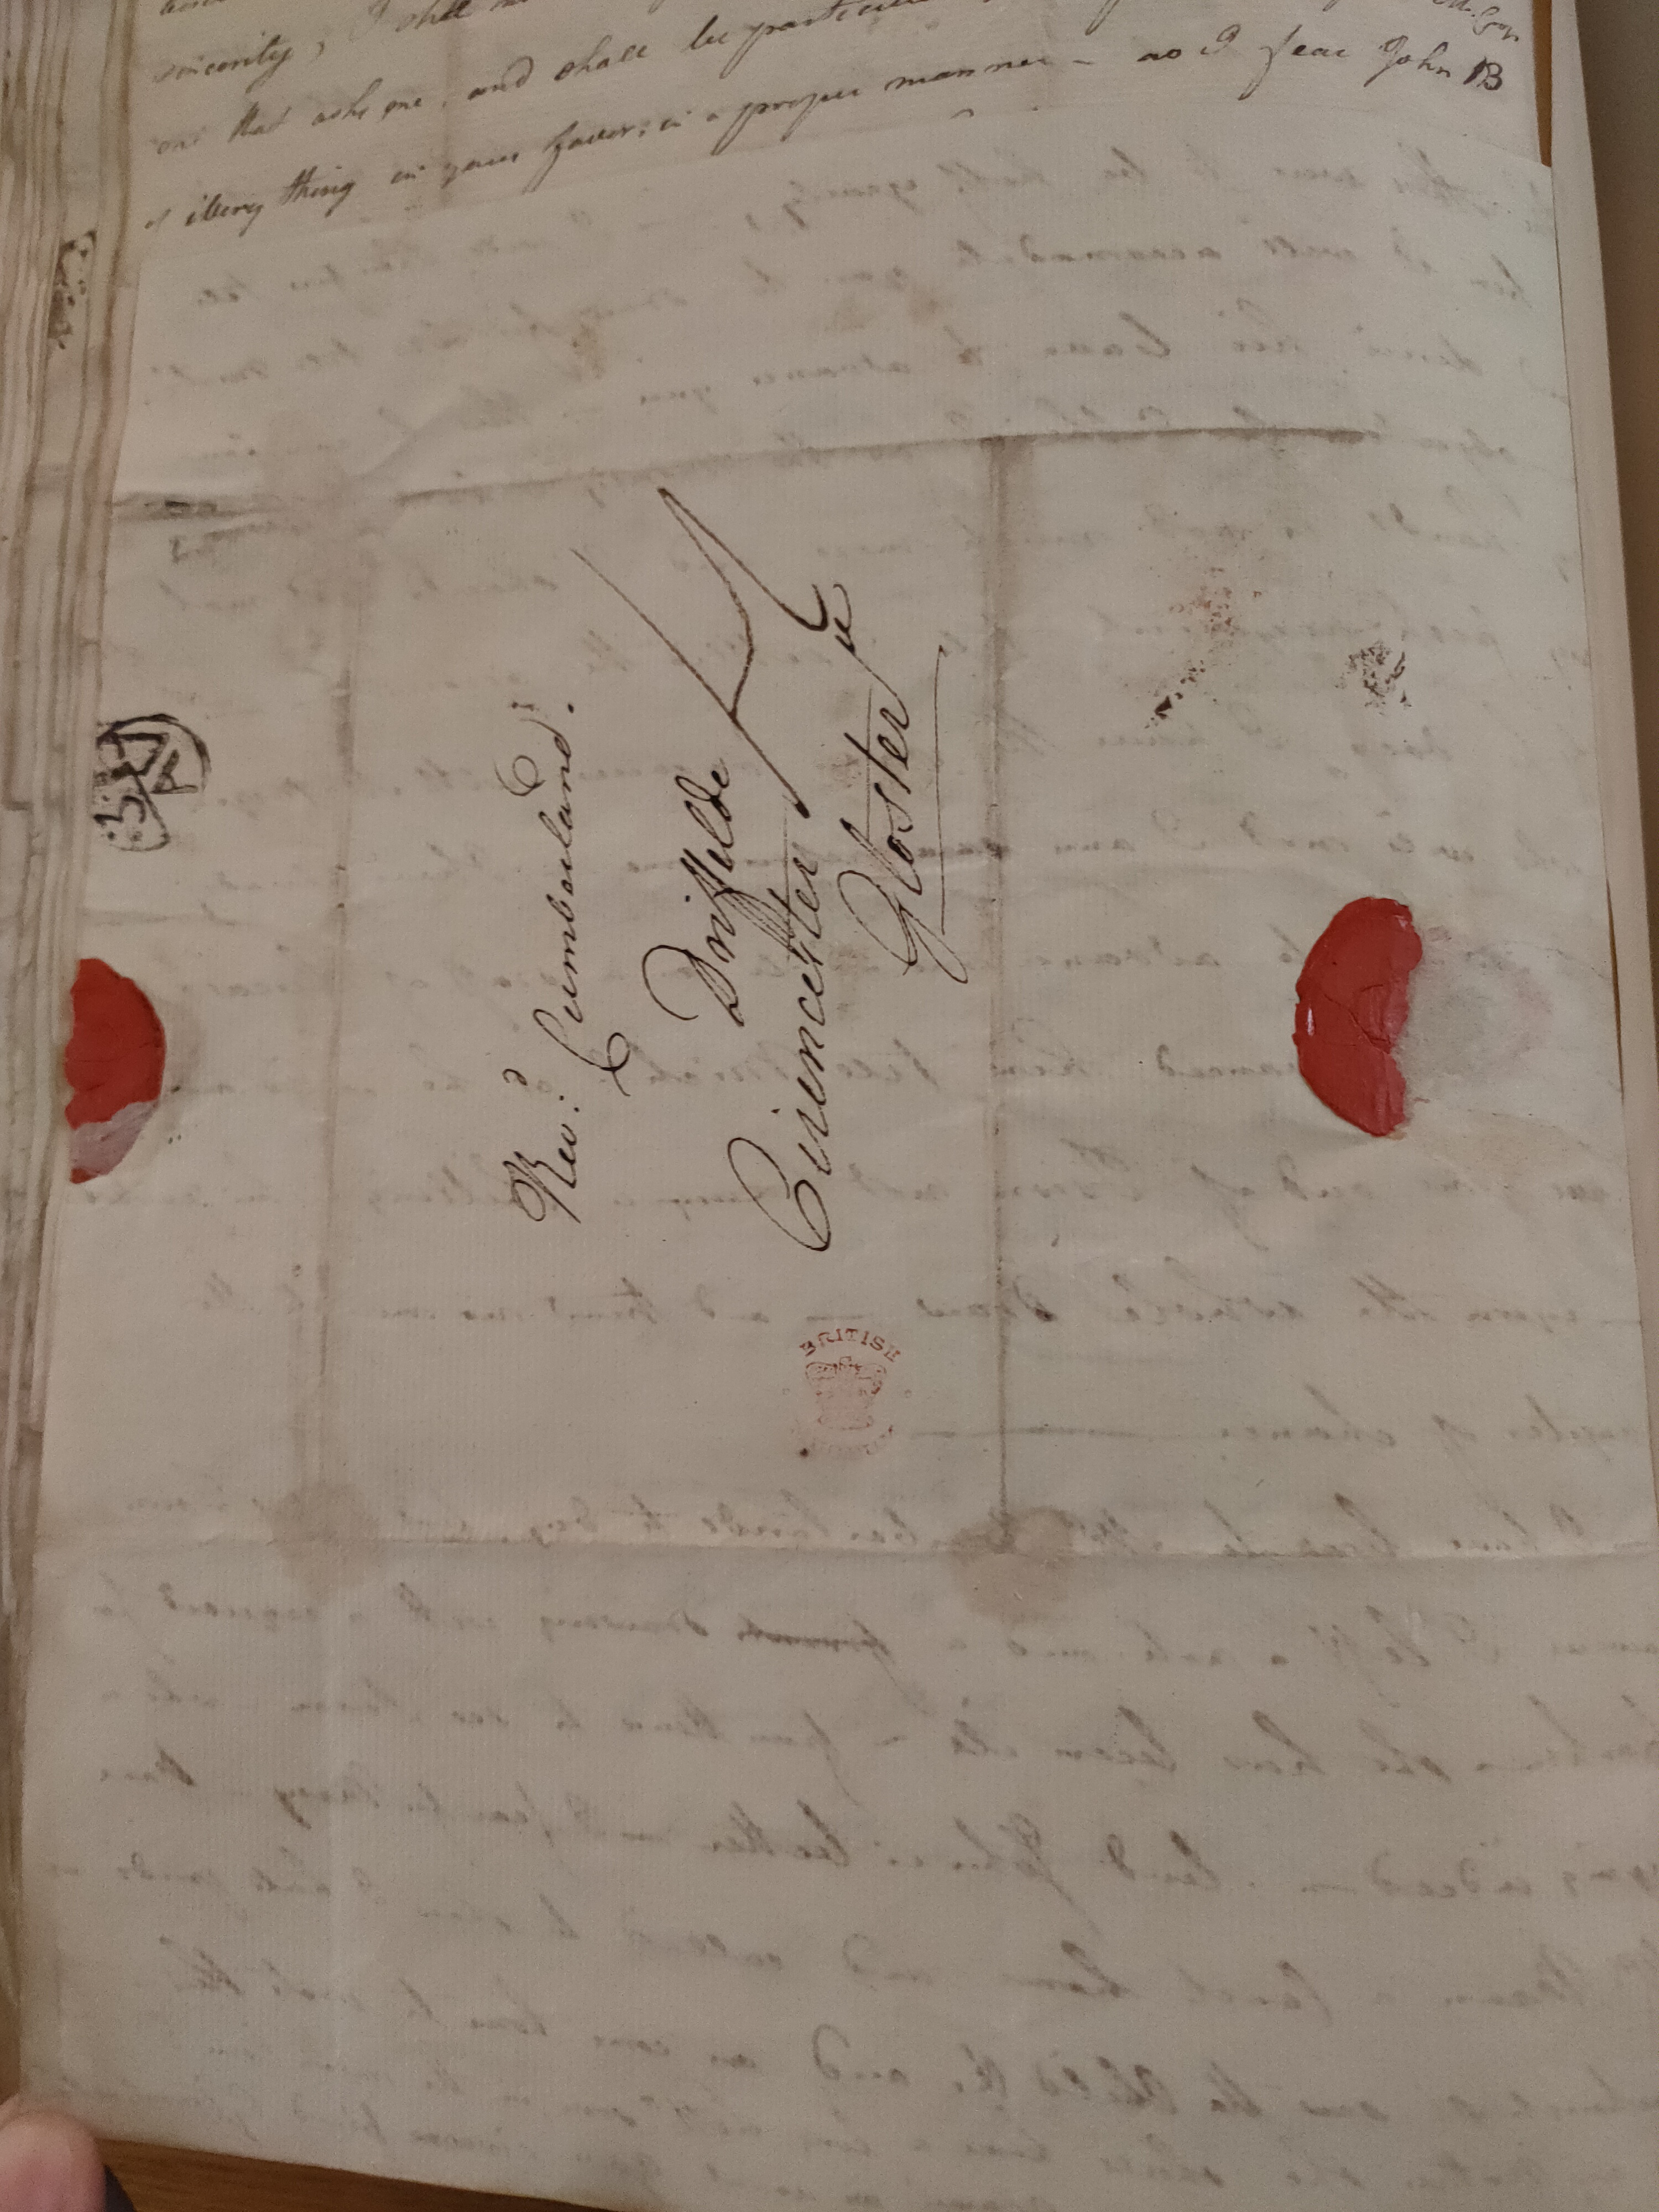 Image #4 of letter: George Cumberland to Revd Richard Cumberland, 30 August 1778